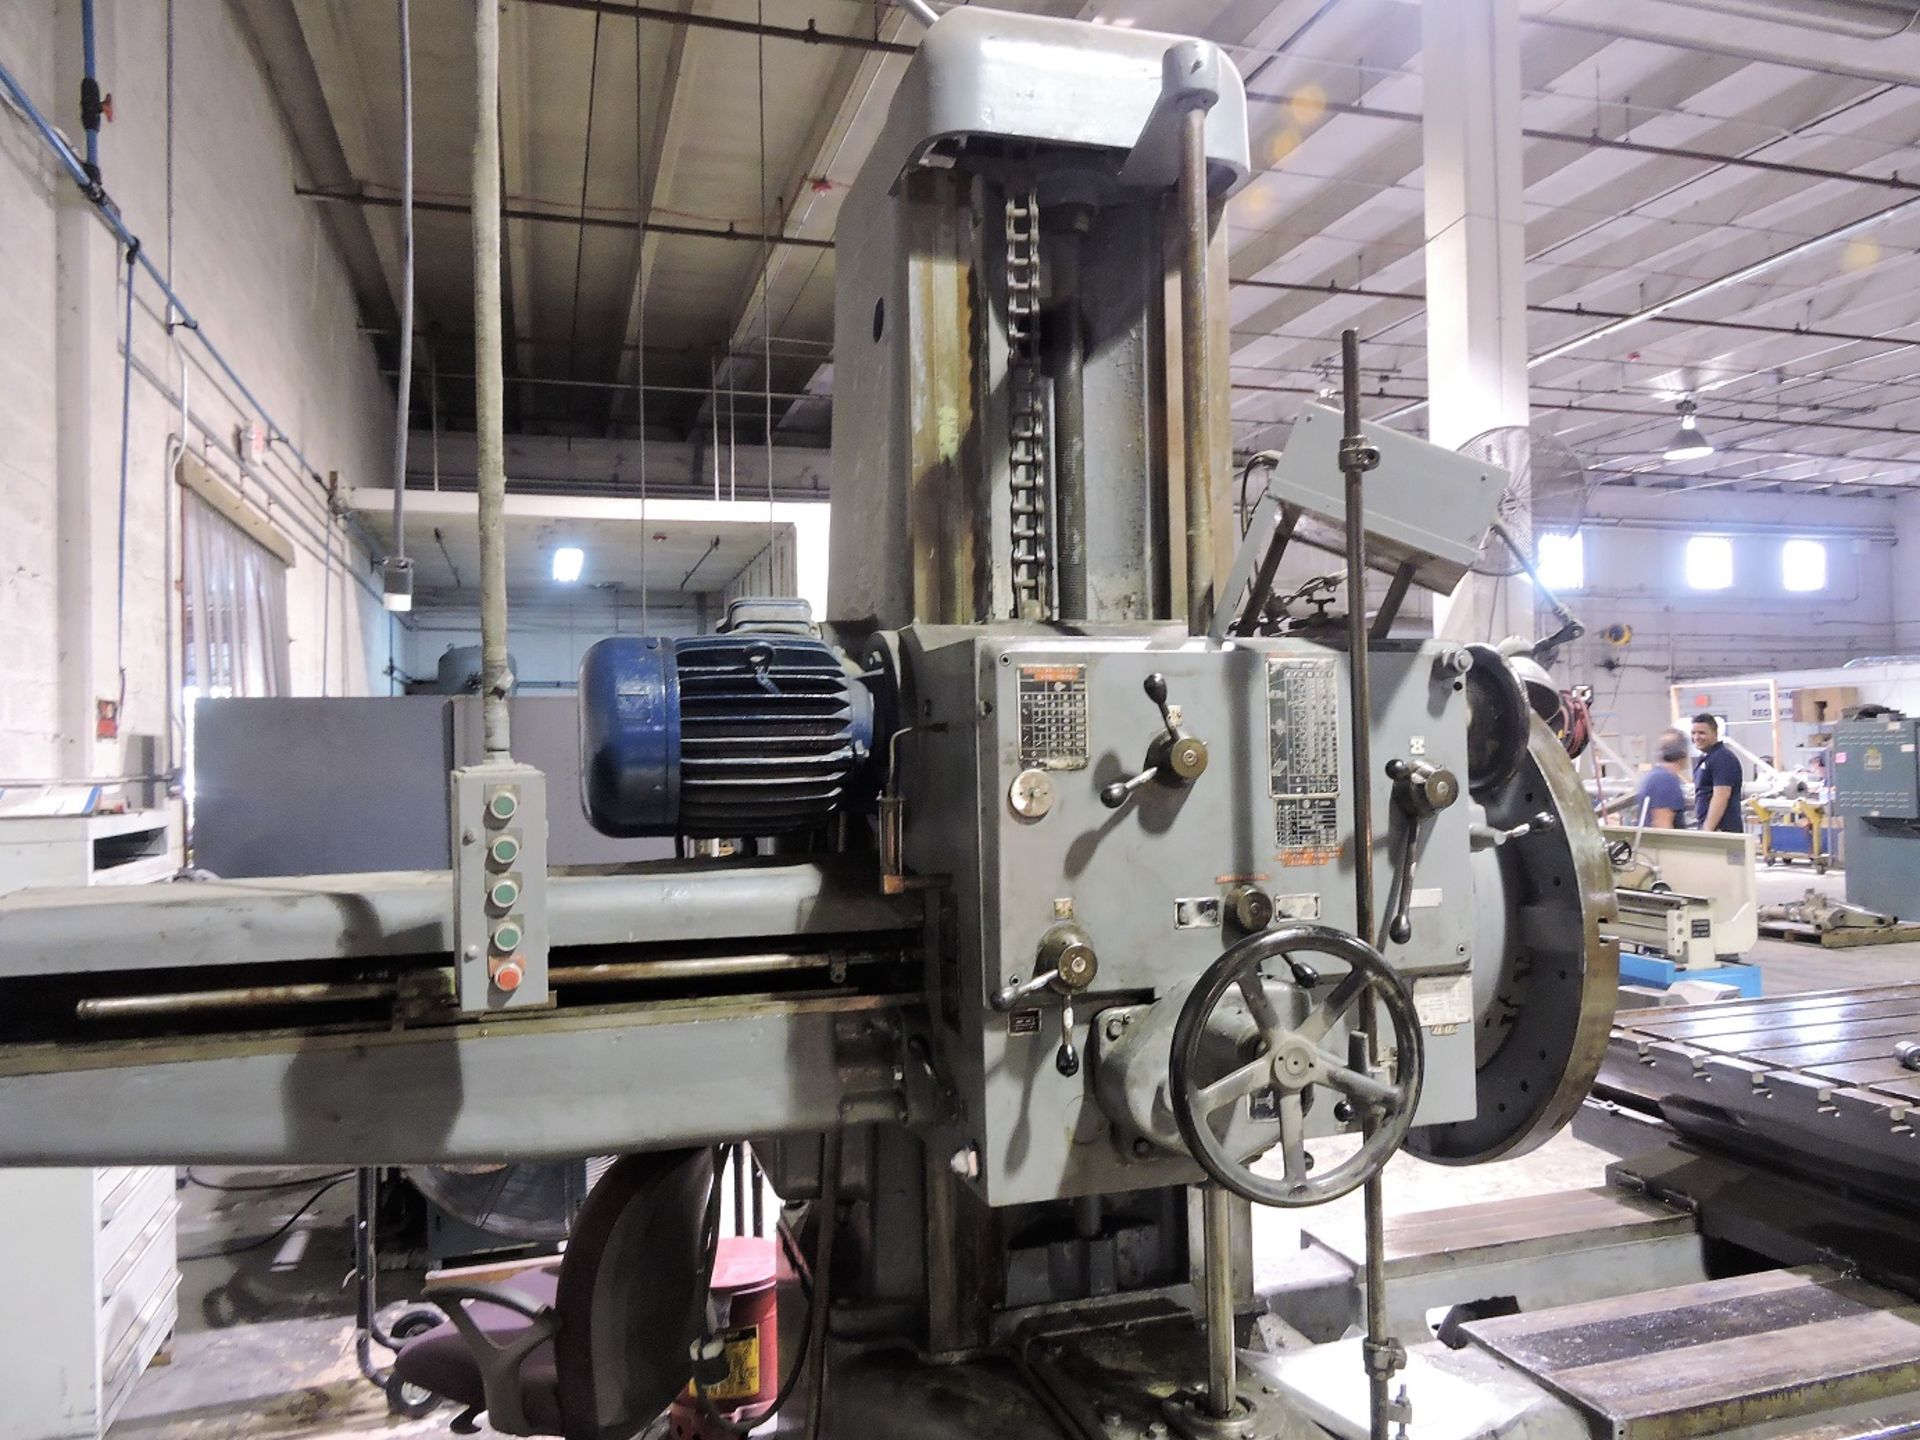 4" Union Model BFT-100II Table Type Horizontal Boring Mill, Built in Rotary Table, - Image 2 of 8